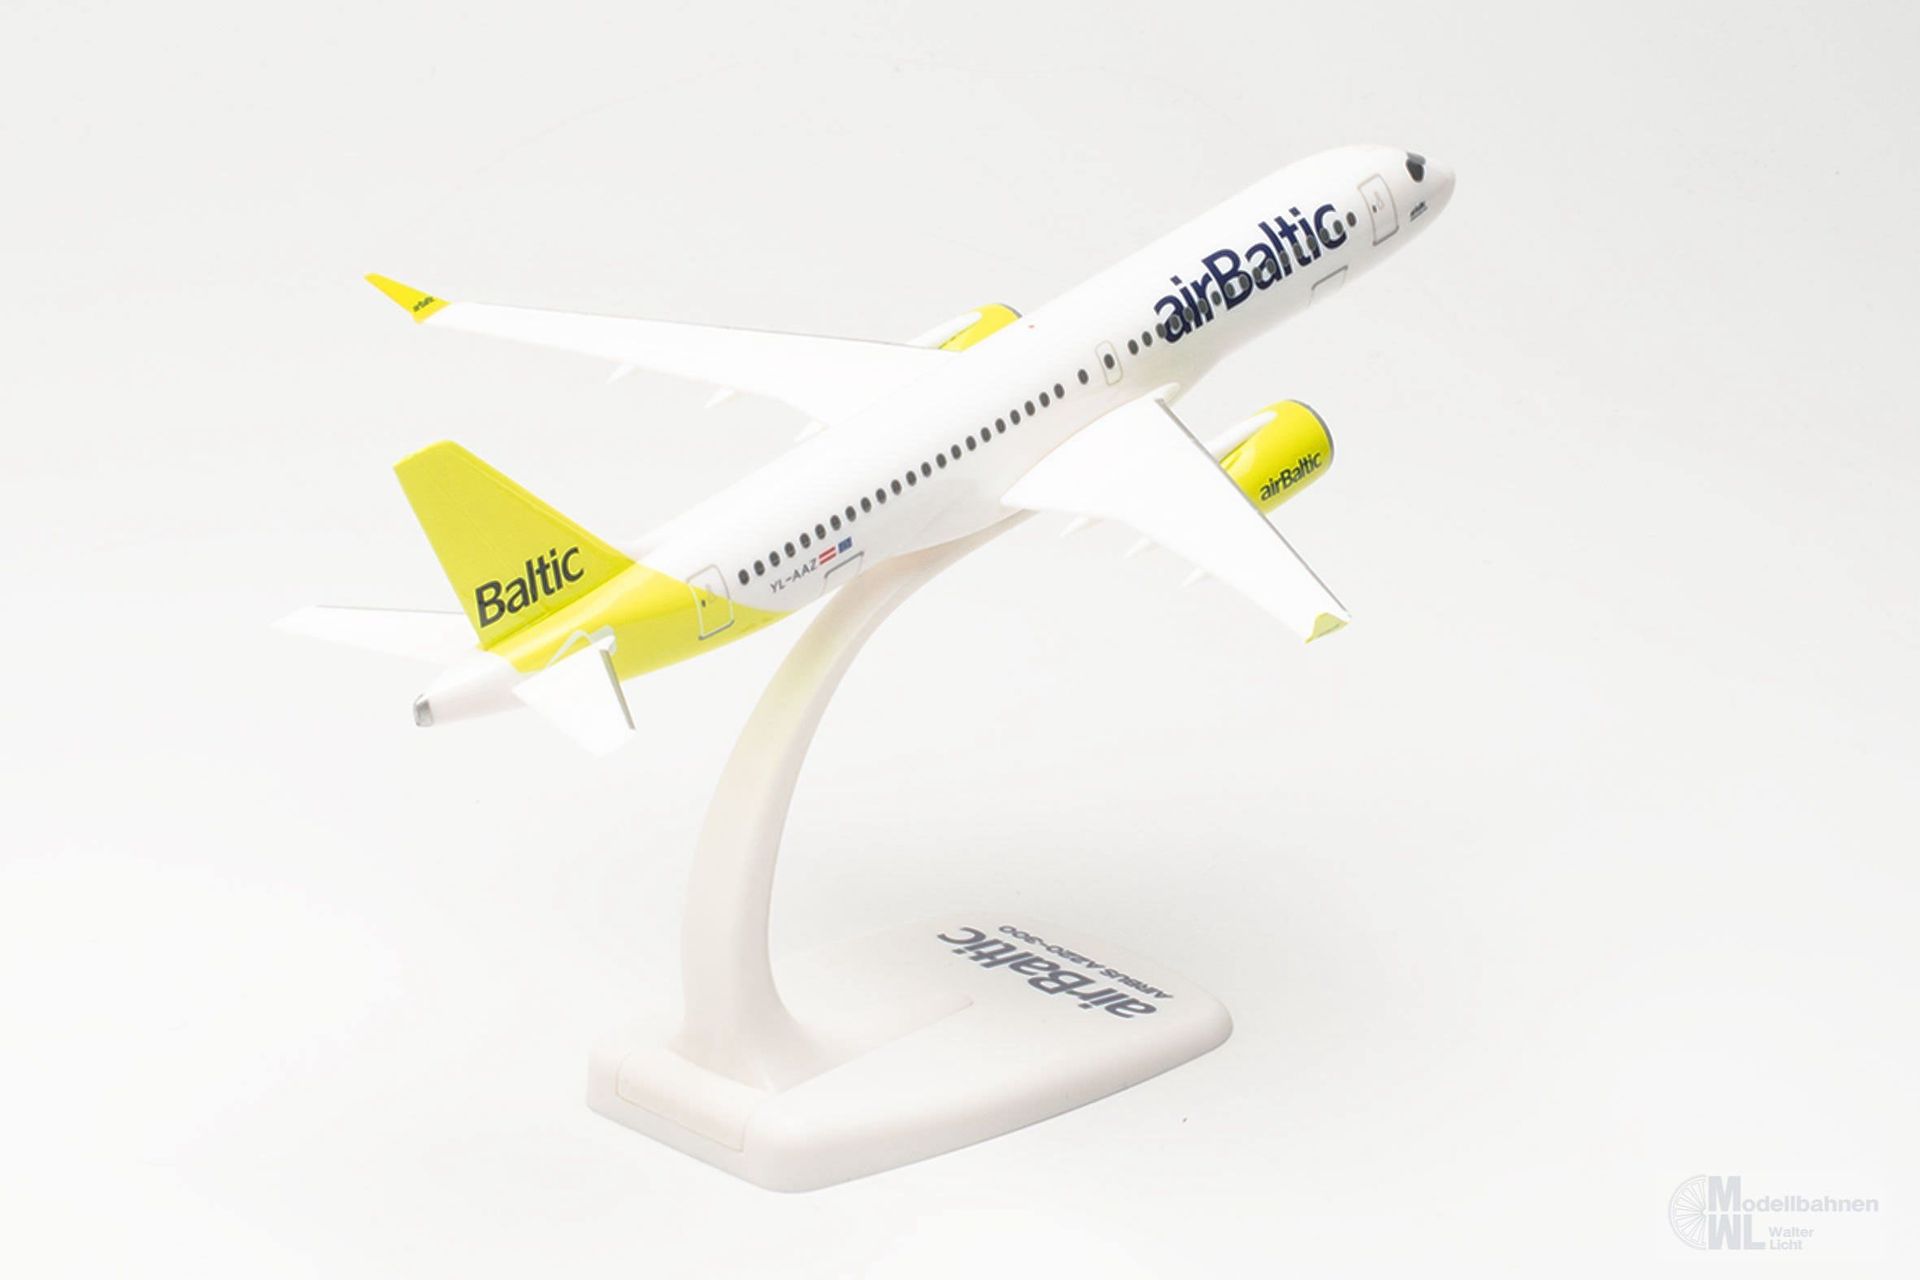 Herpa 613637 - airBaltic Airbus A220-300 1:200